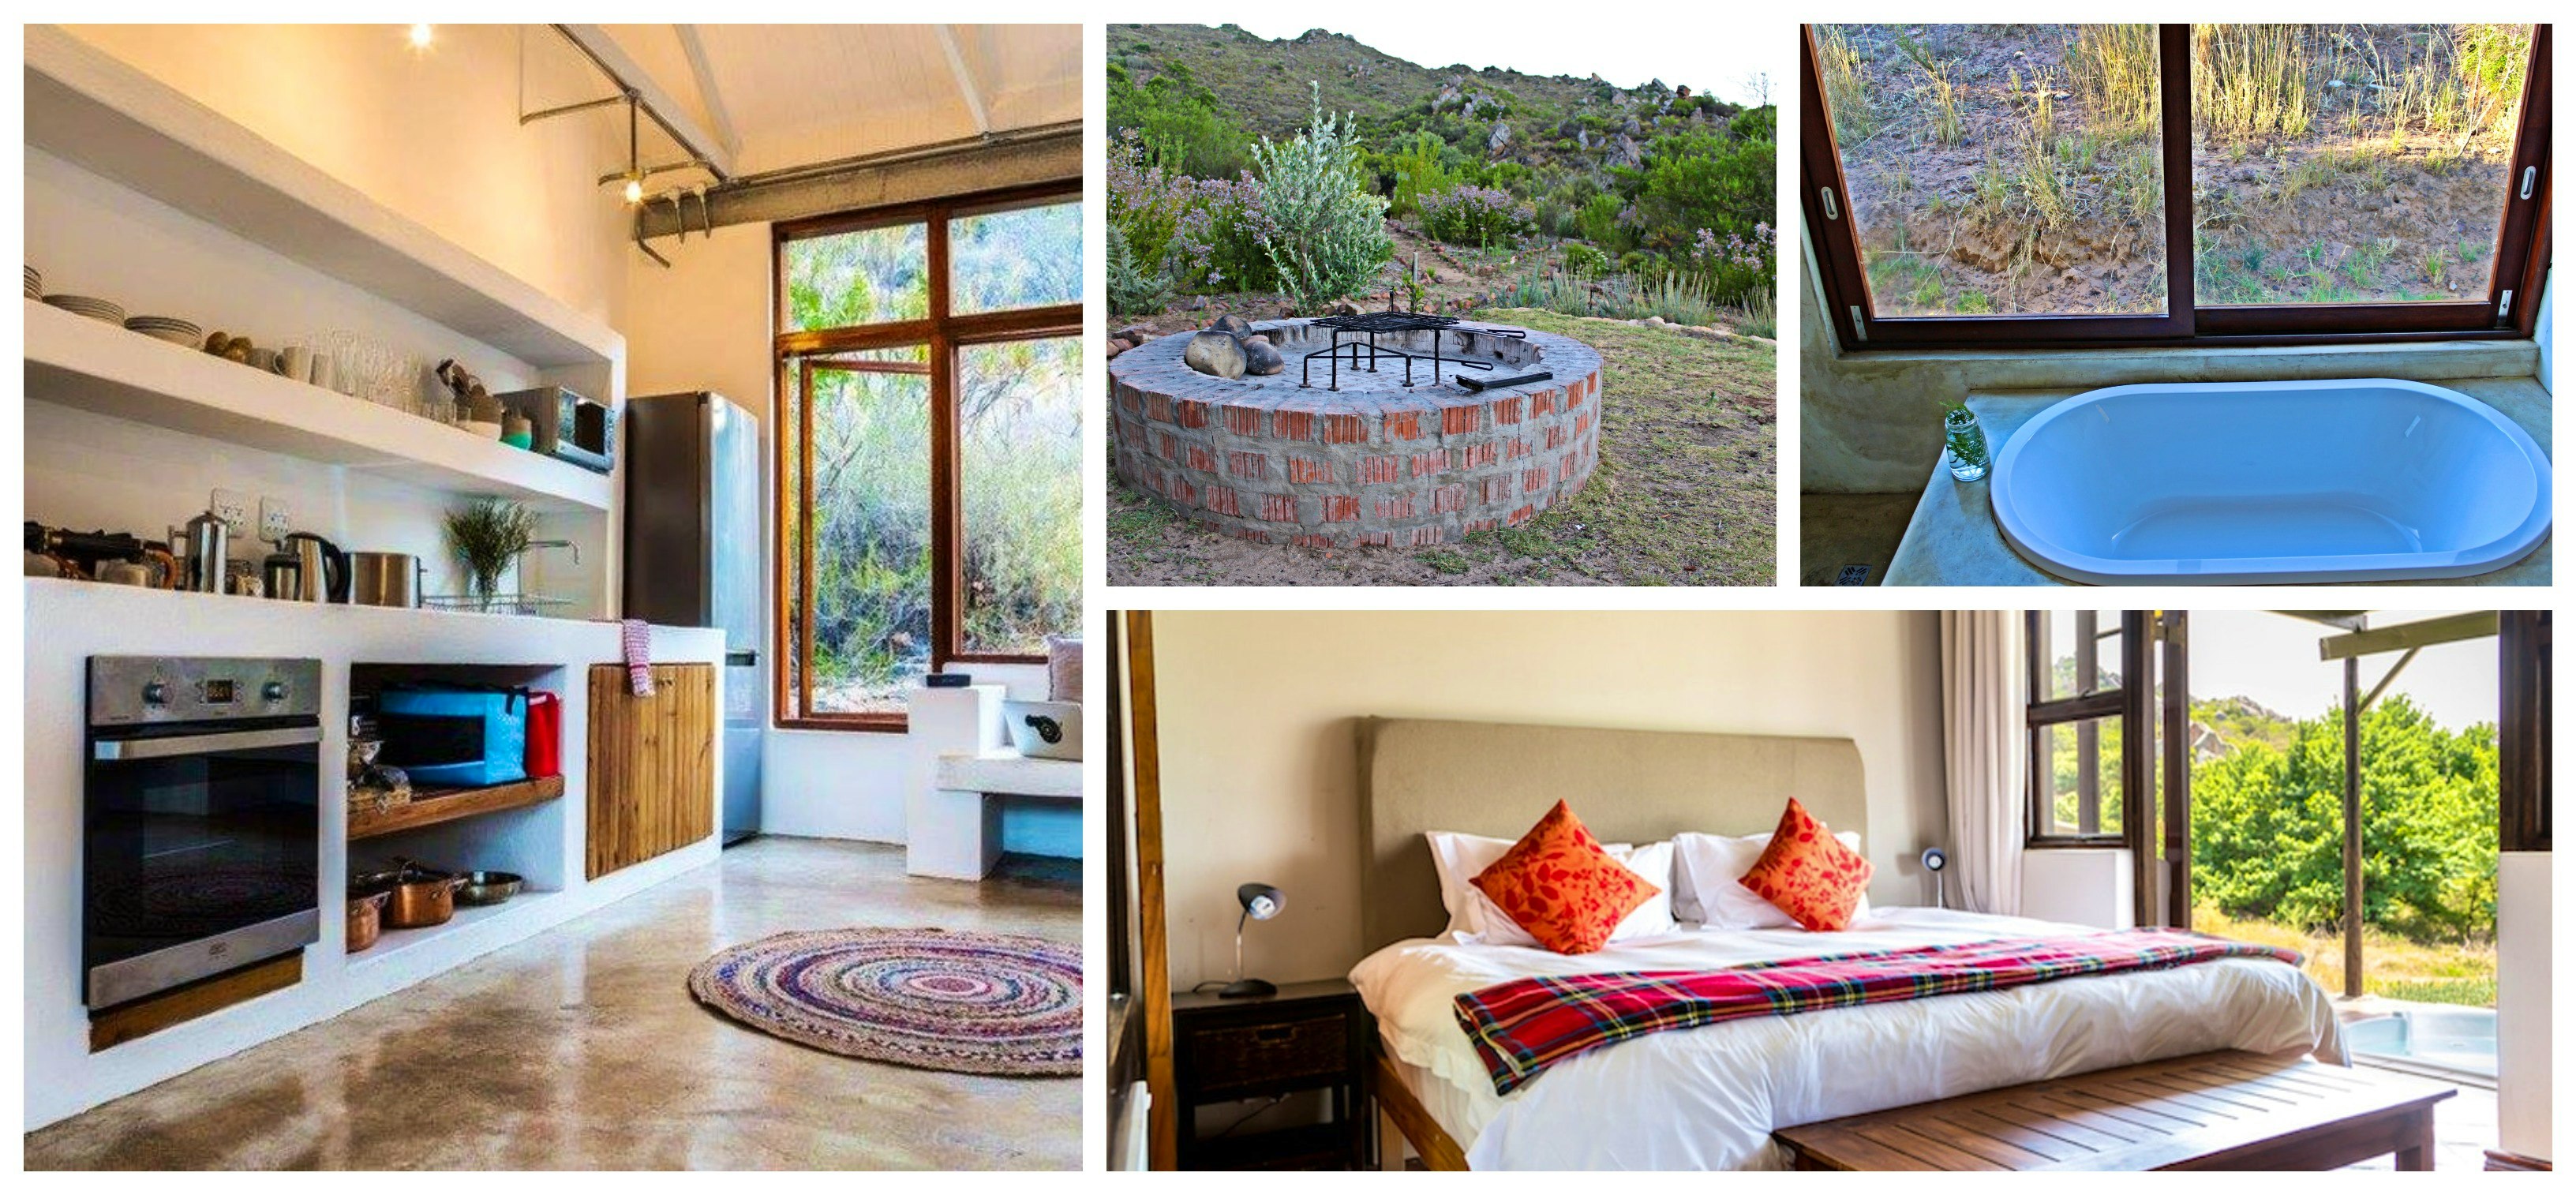 Inside a chalet at Cederkloof. | Photos left and bottom right: TravelGround